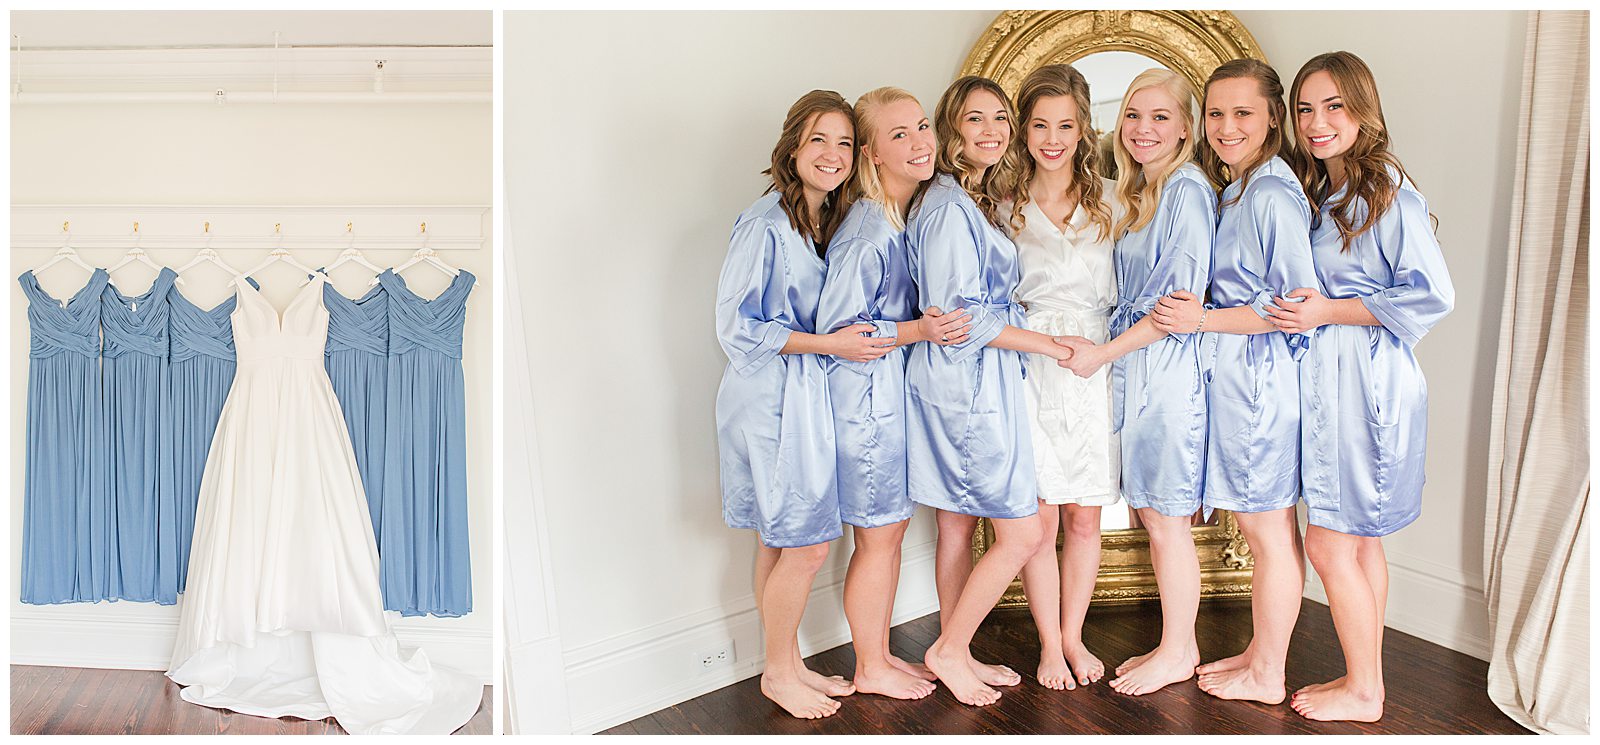 collage of bridesmaids gowns and wedding gown hanging, bridesmaids and bride huddled together in matching robes